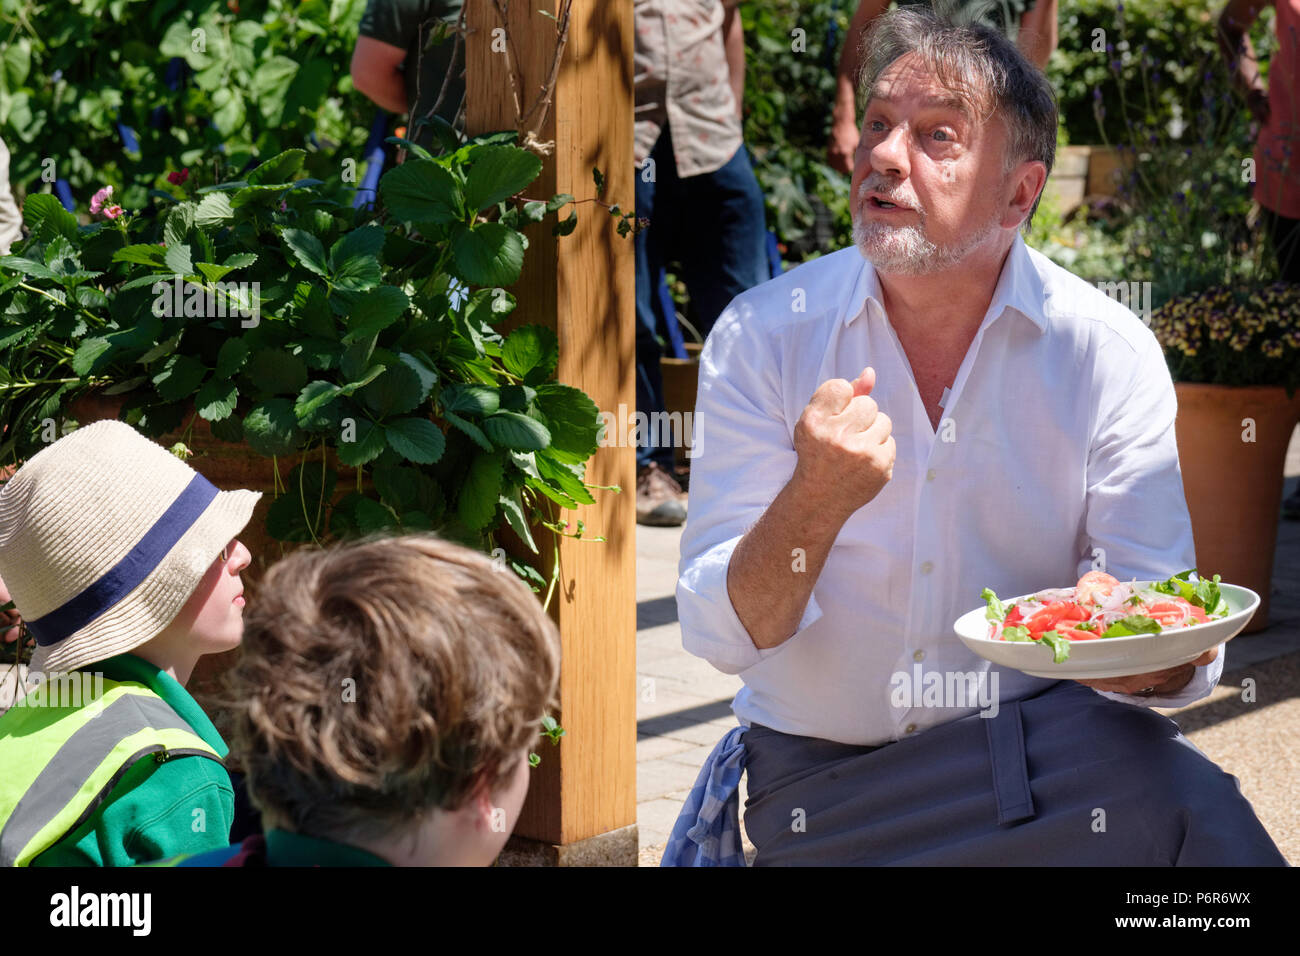 RHS Hampton Court Palace Flower Show, July 2, 2018. Raymond Blanc owner and chef of Le Manoir aux Quat' Saisons teaching children about food. Credit P Tomlins/Alamy Live News Stock Photo